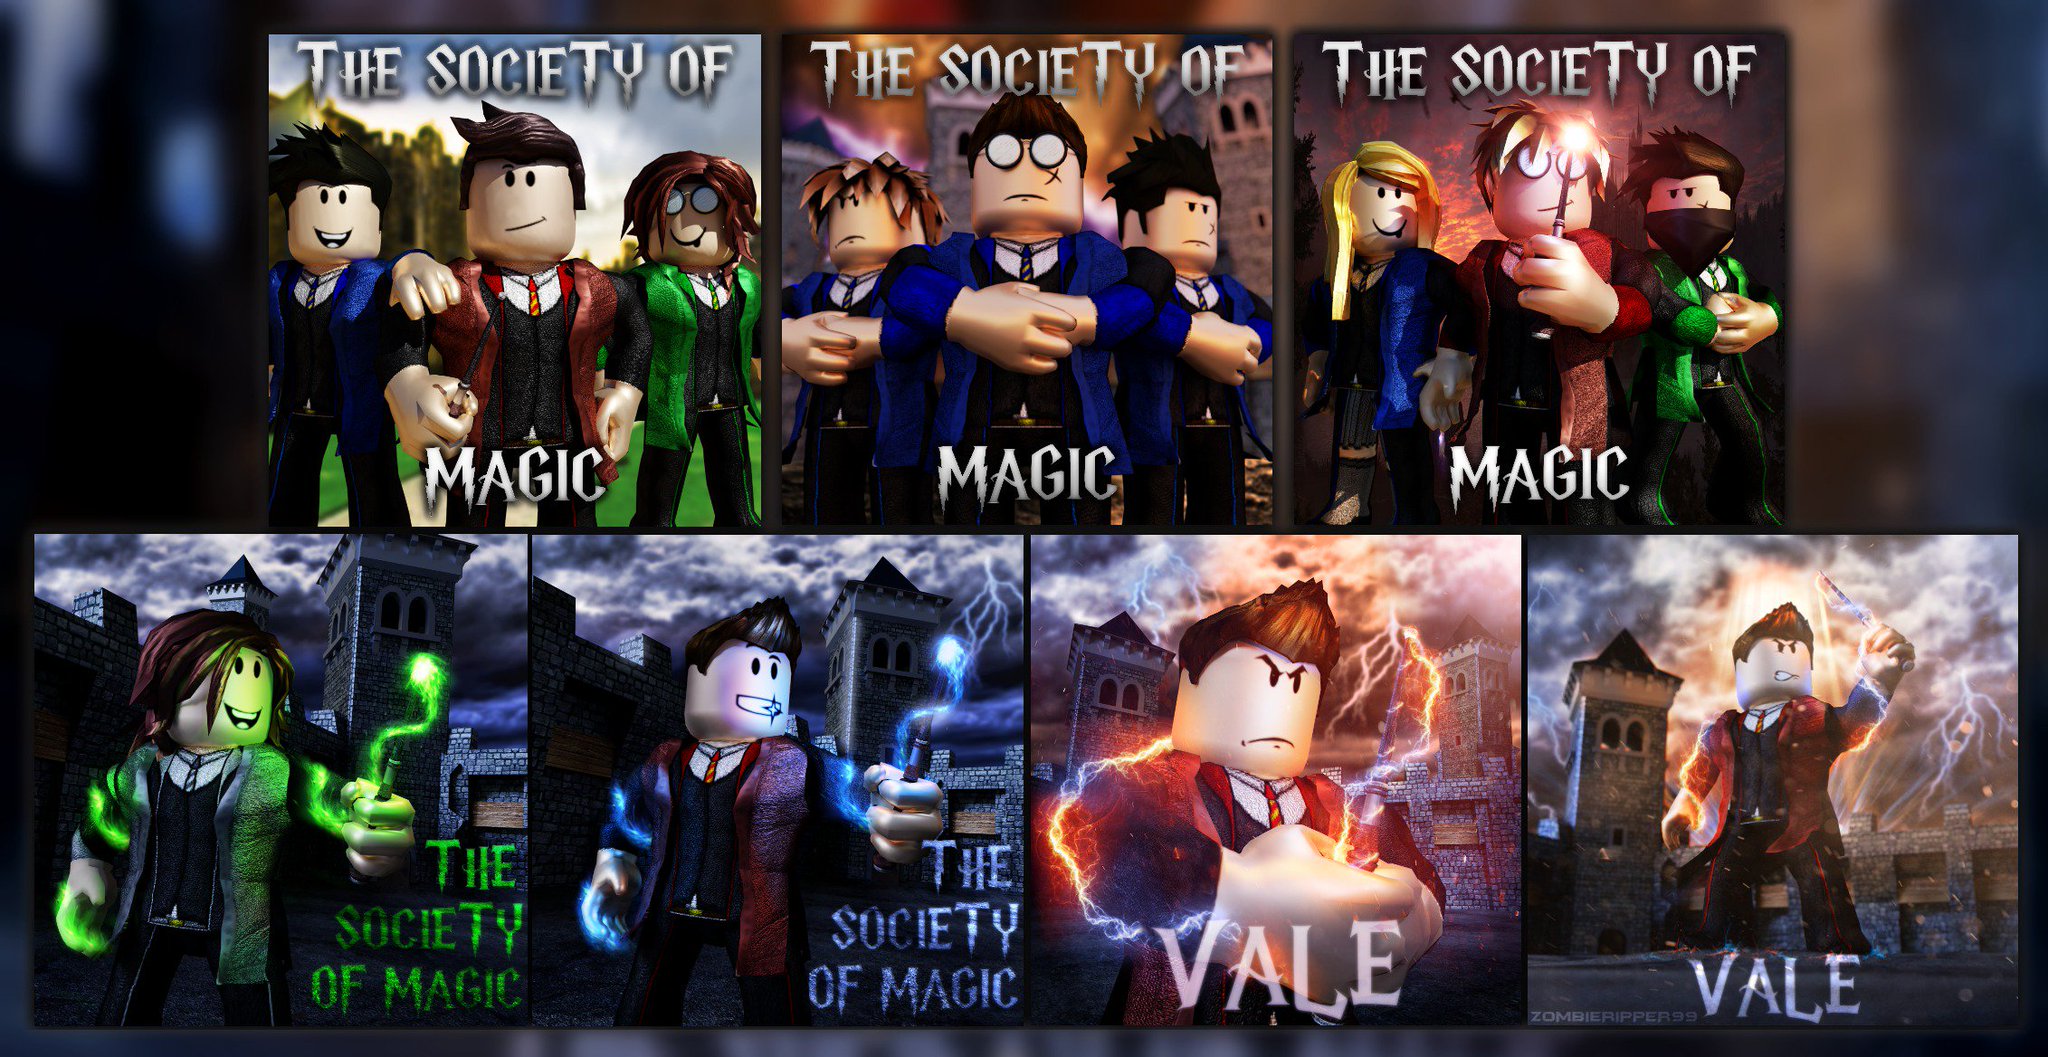 Rippergfx On Twitter Gfx Order For Redbydesign S The Society Of Magic Come Join The Group Https T Co C78n5u0oqk Made With Paint Net And Blender As Always Robloxdev Rblxgfx Https T Co Fnvtygczn5 - roblox renders and gfx radbearsalad twitter